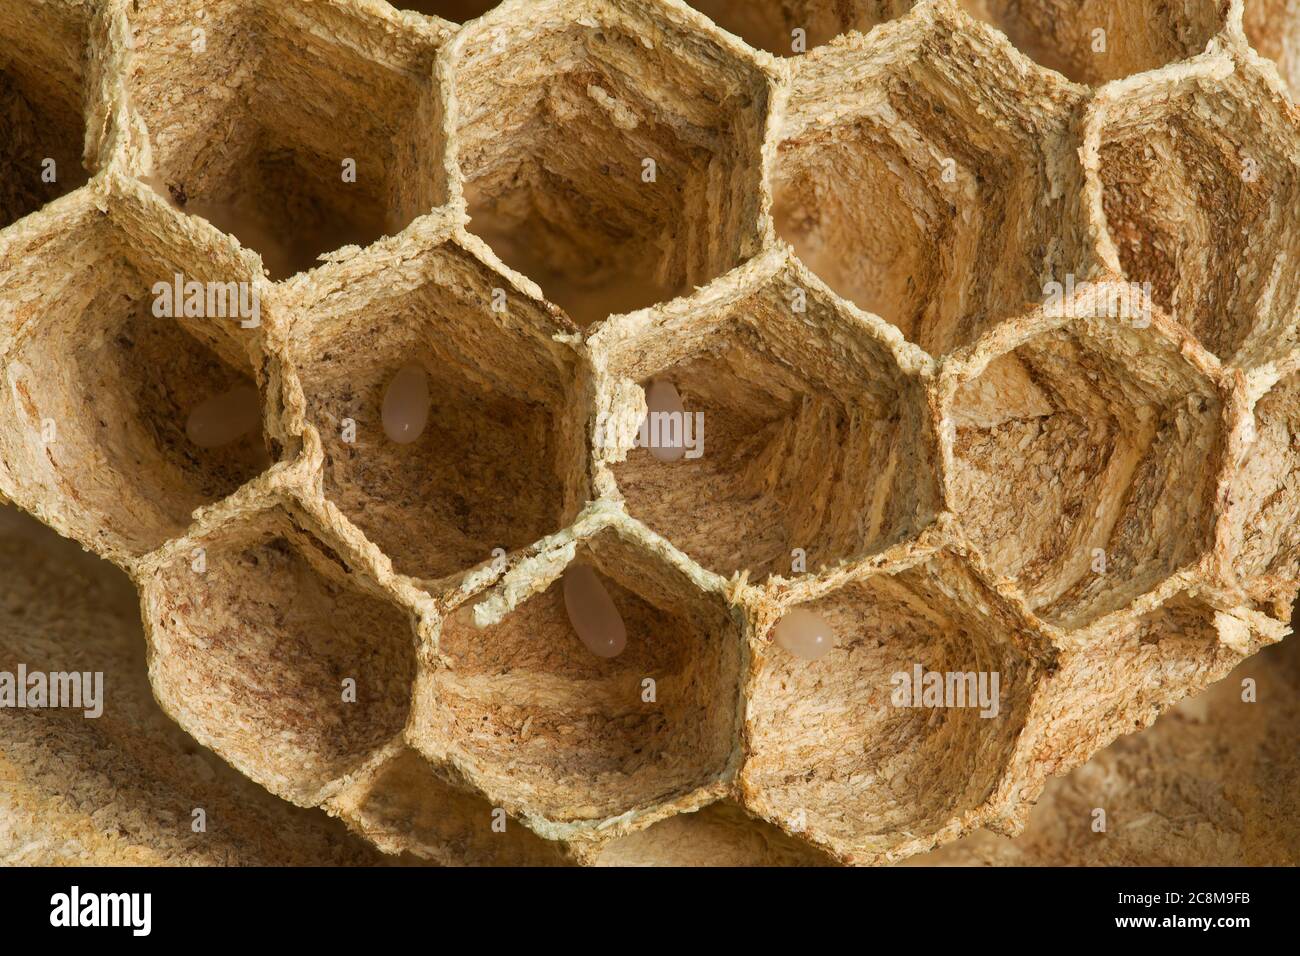 Detail of European Wasp Nest with Larvae Inside Stock Photo